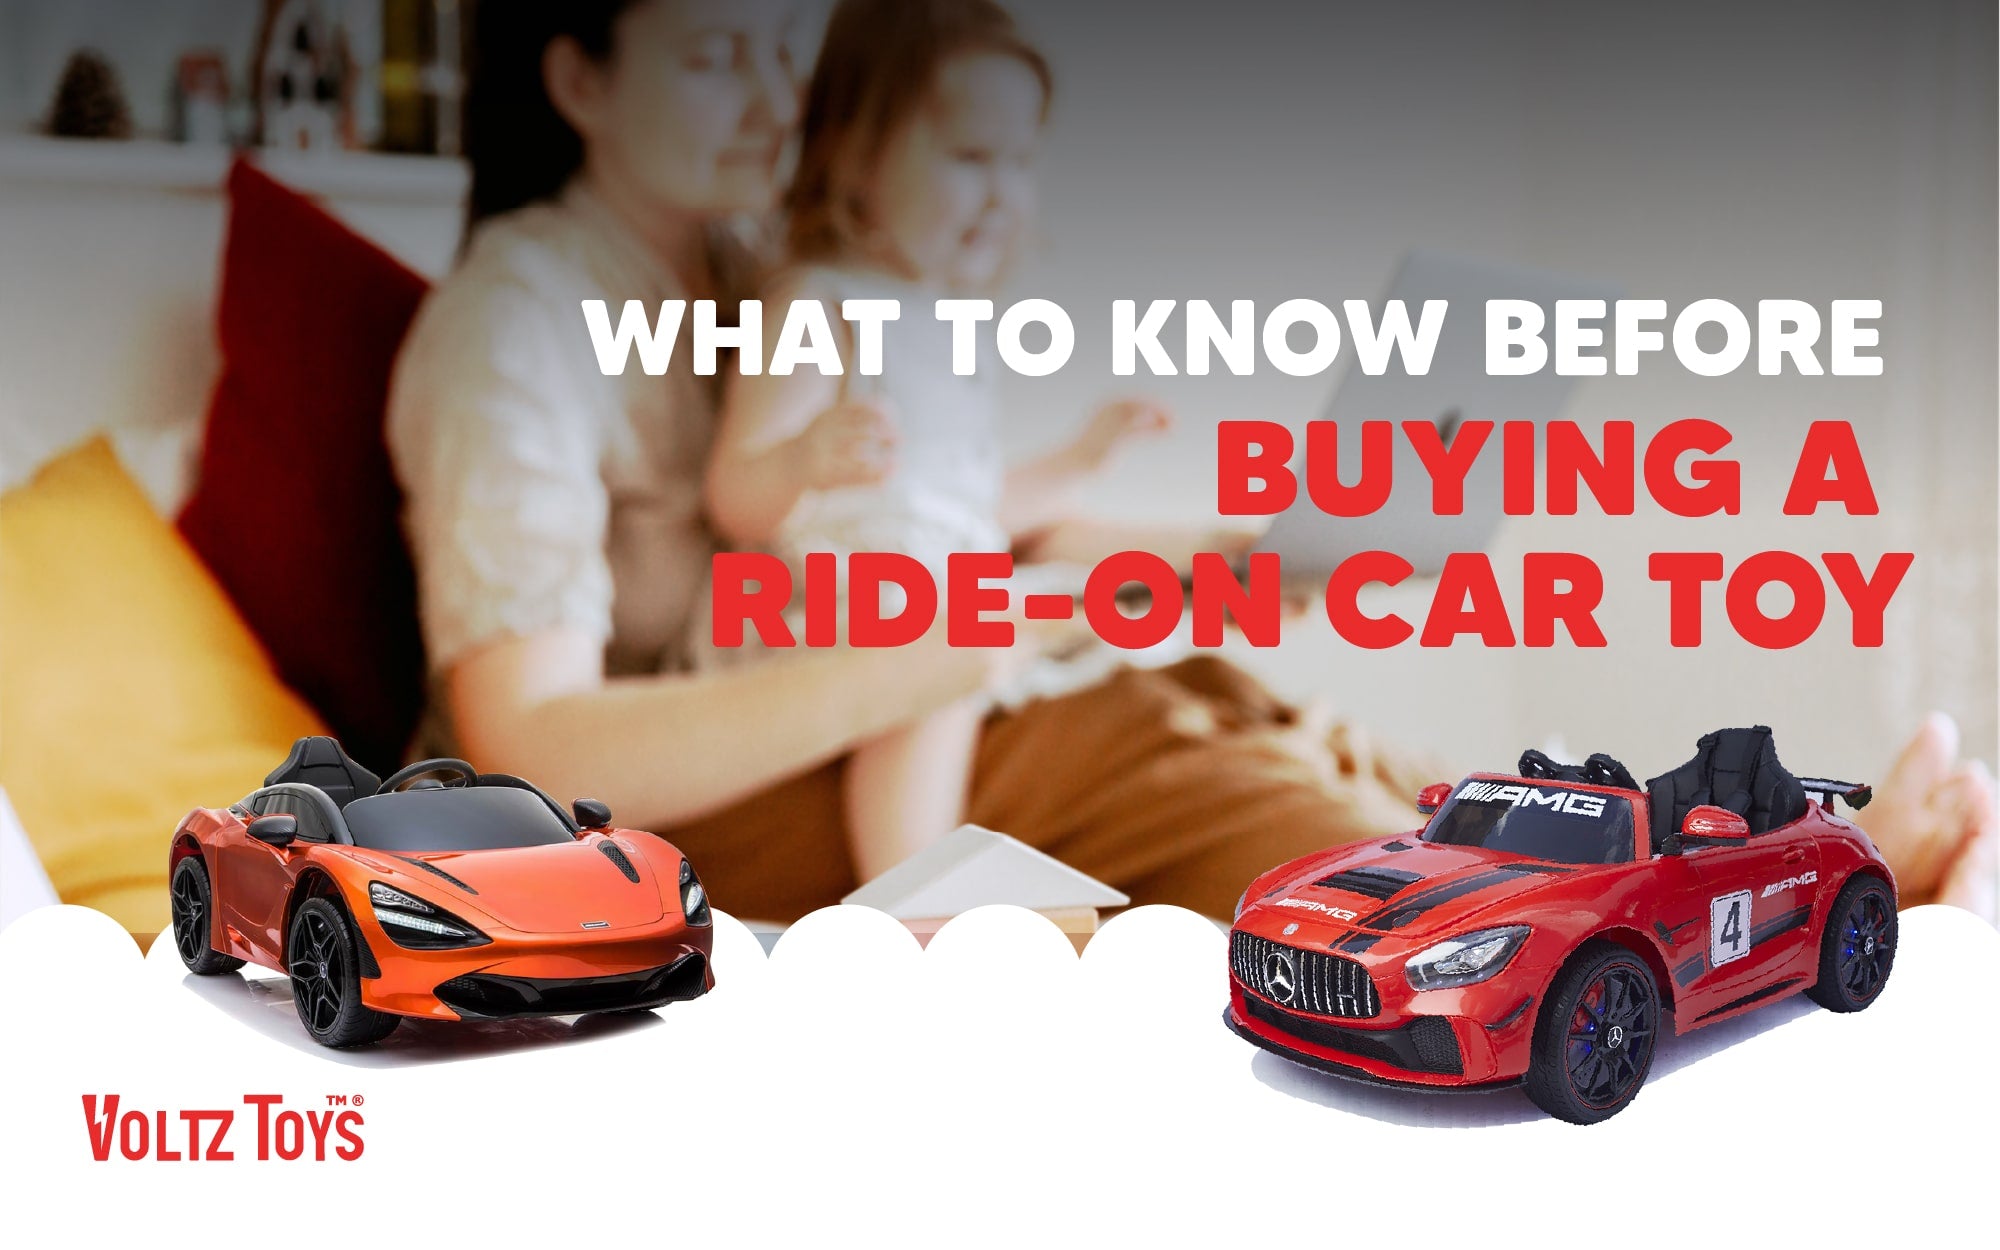 What to Know Before Buying a Ride-On Car Toy